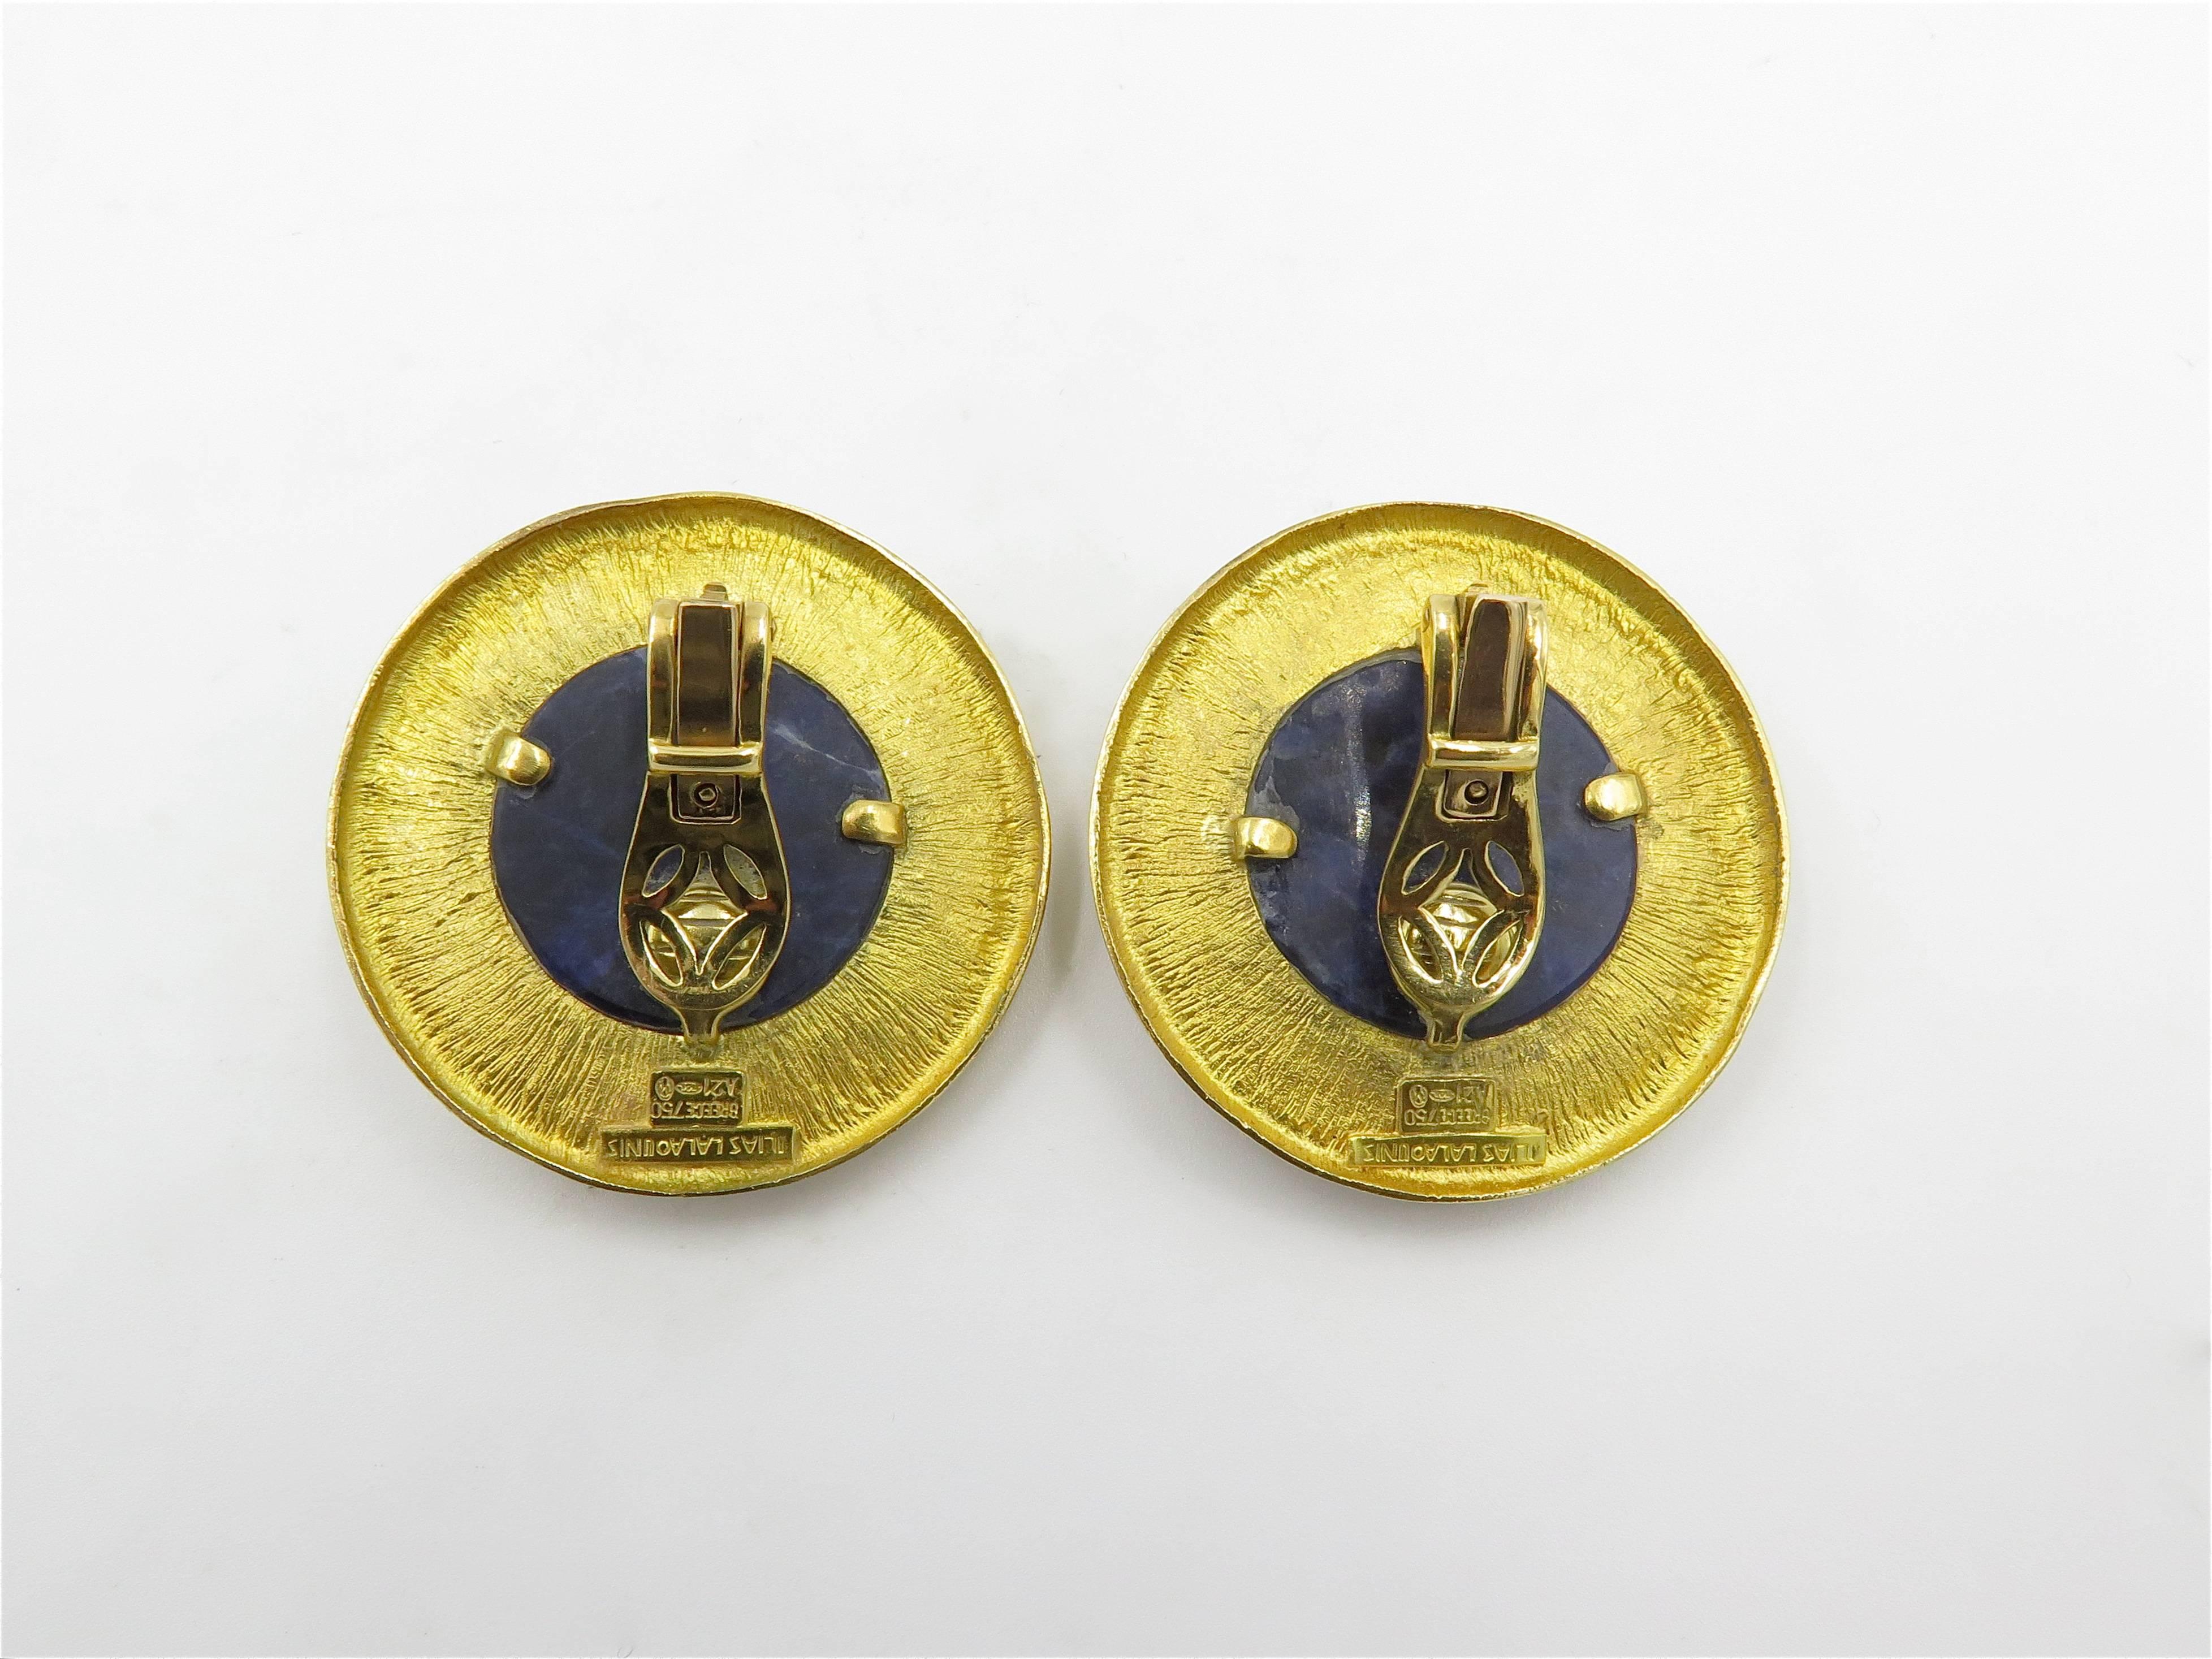 A pair of 18 karat yellow gold and sodalite earrings. Lalaounis. Each set with a round cabochon sodalite, within a matte and polished gold surround. Diameter is approximately 1 1/2 inches. Gross weight is approximately 46.0 grams.